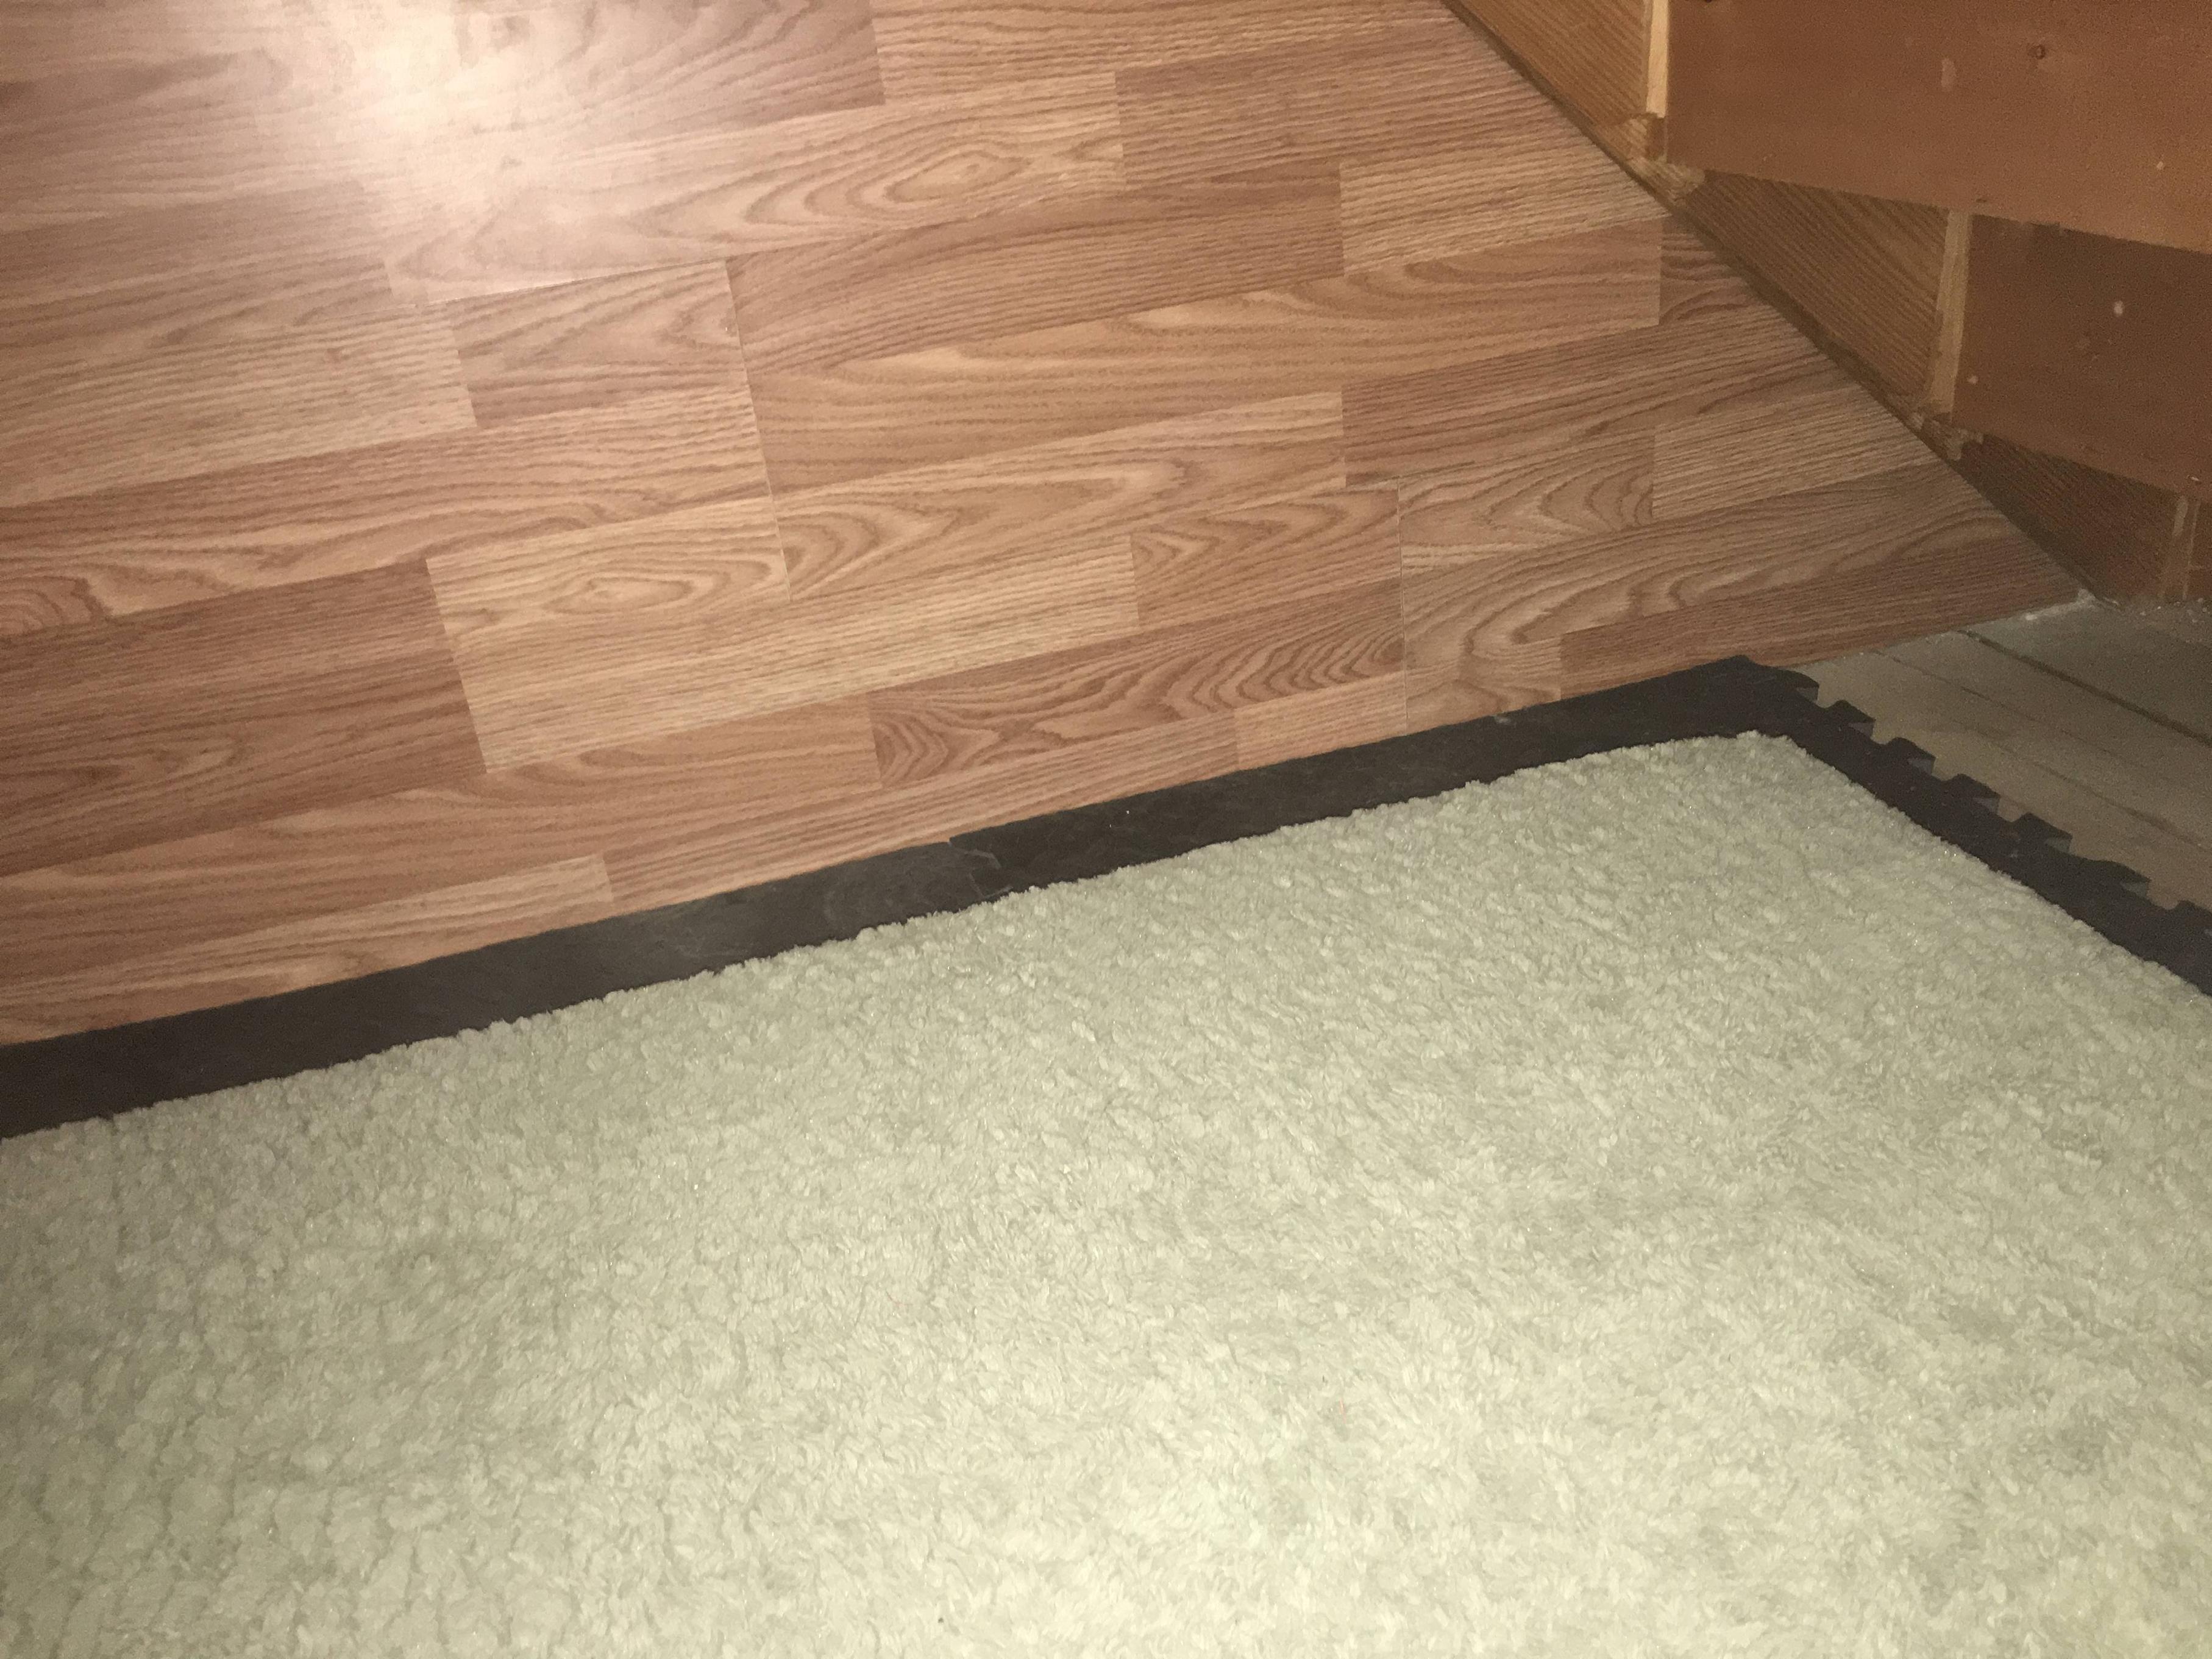 Guy Built His Dog An Under-the-stairs Room.